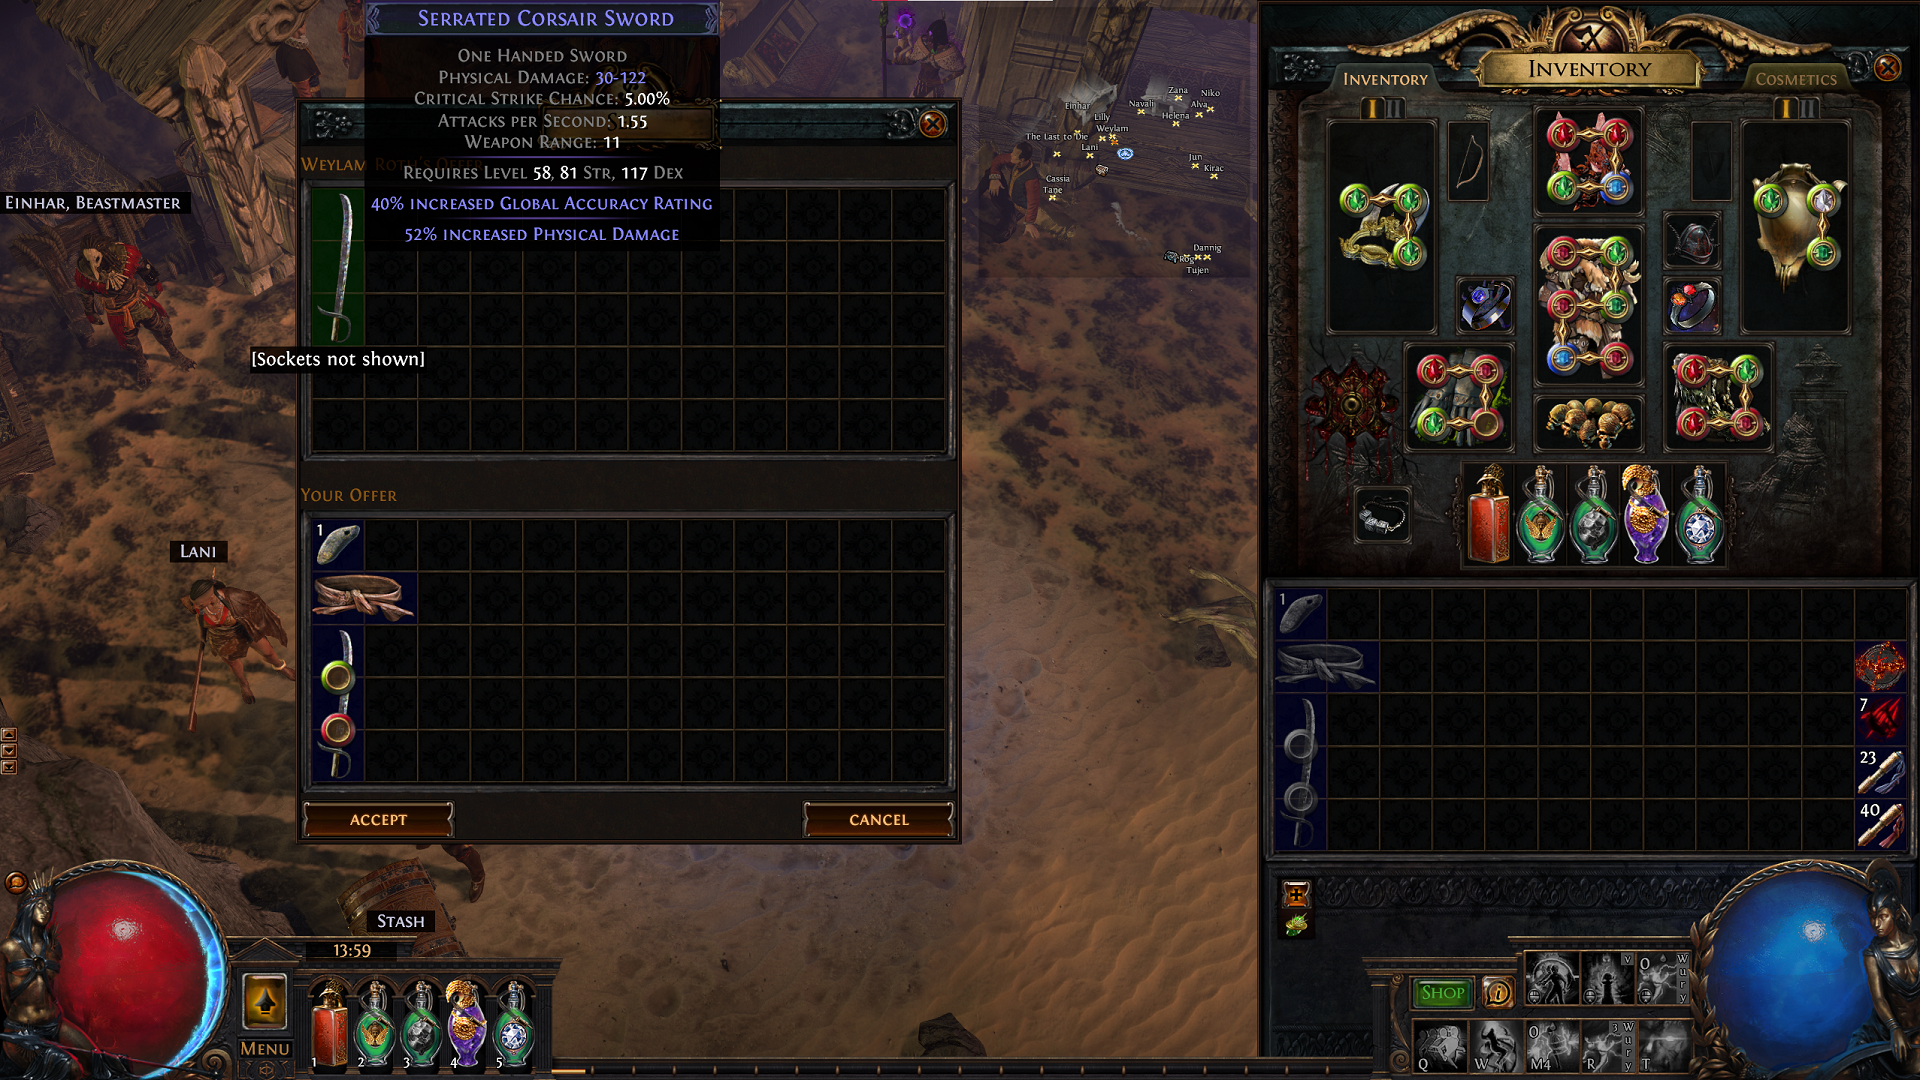 An example of a correctly performed vendor recipe in Path of Exile, returning a modified item